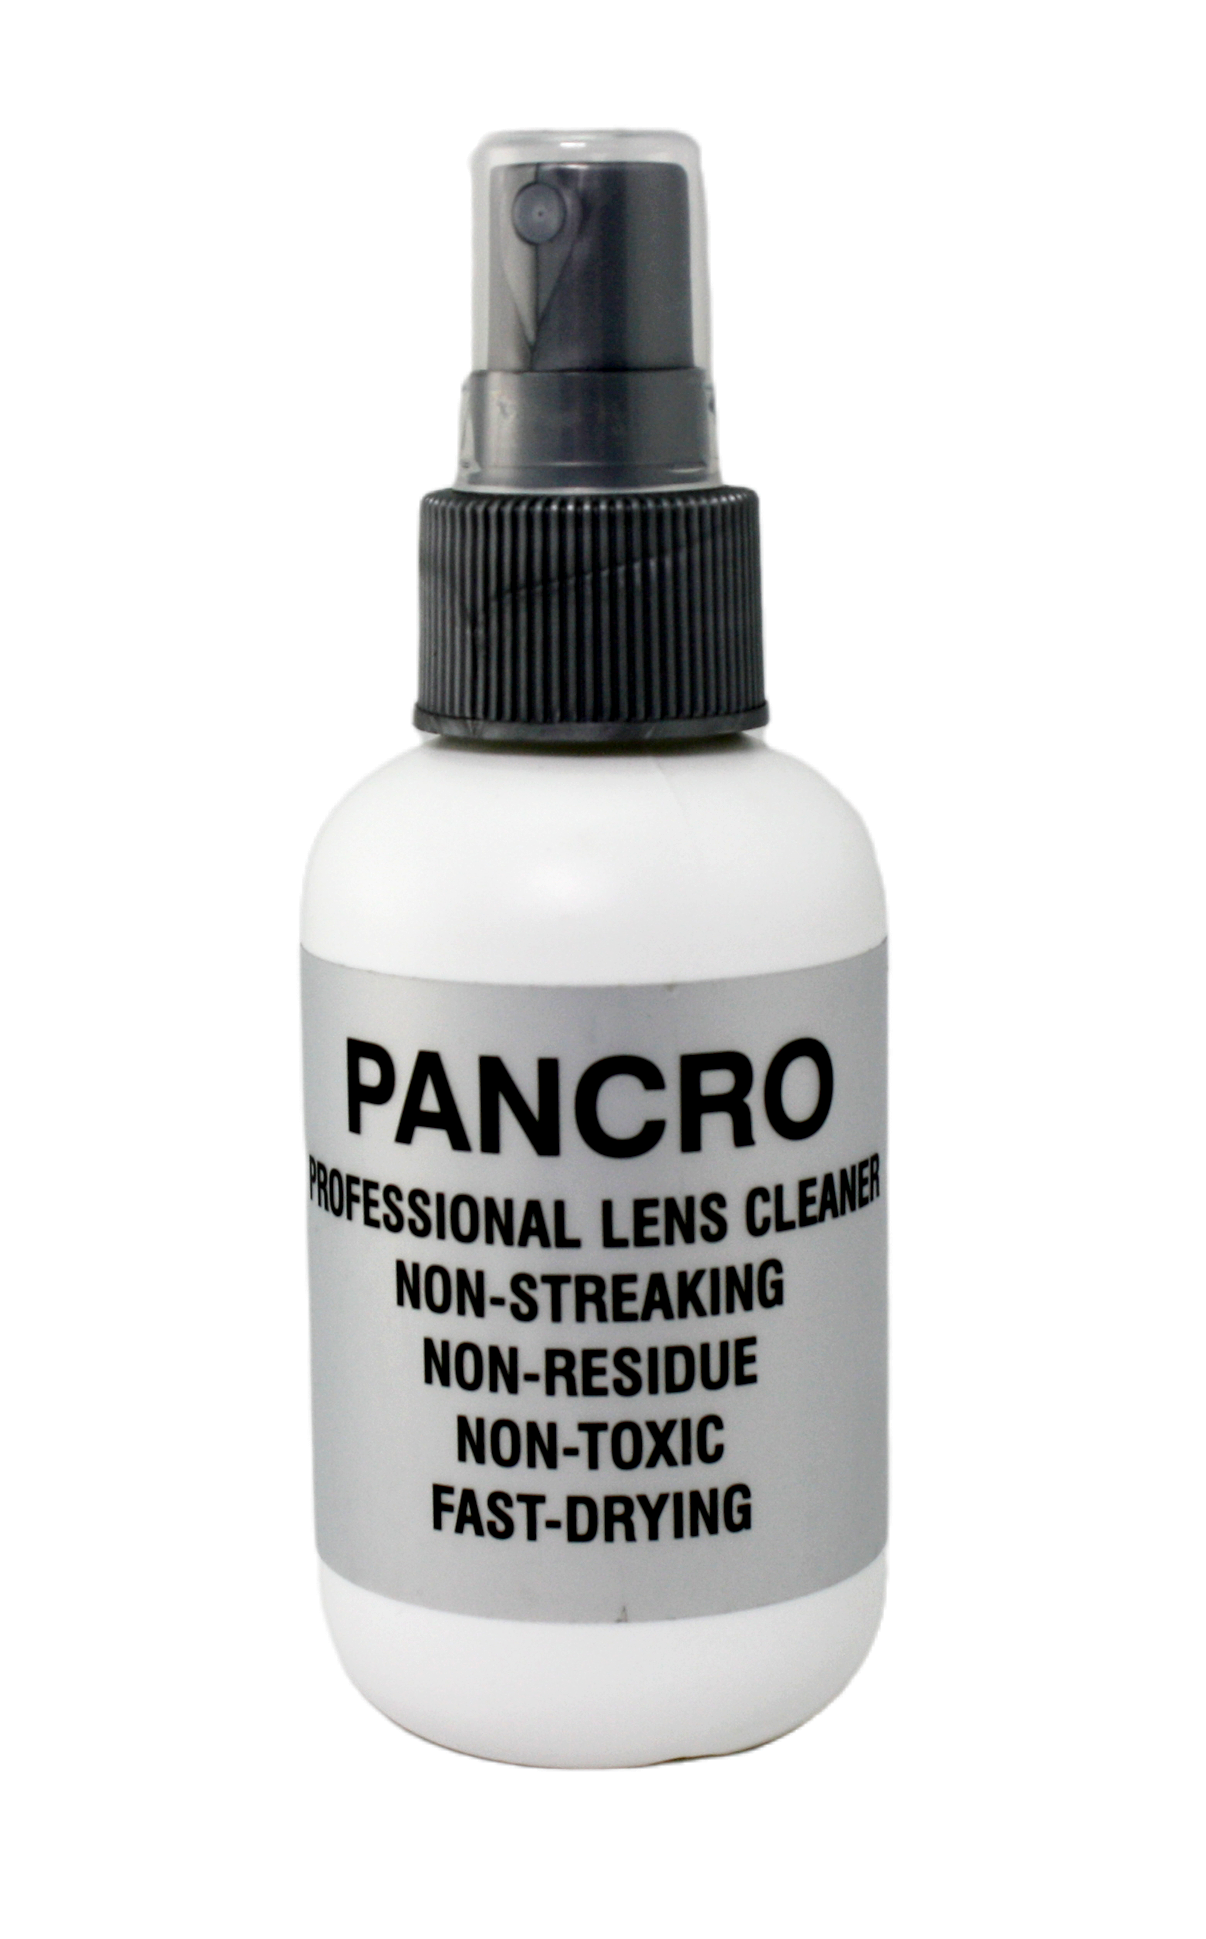 A bottle of Pancro lens cleaner, with lid on